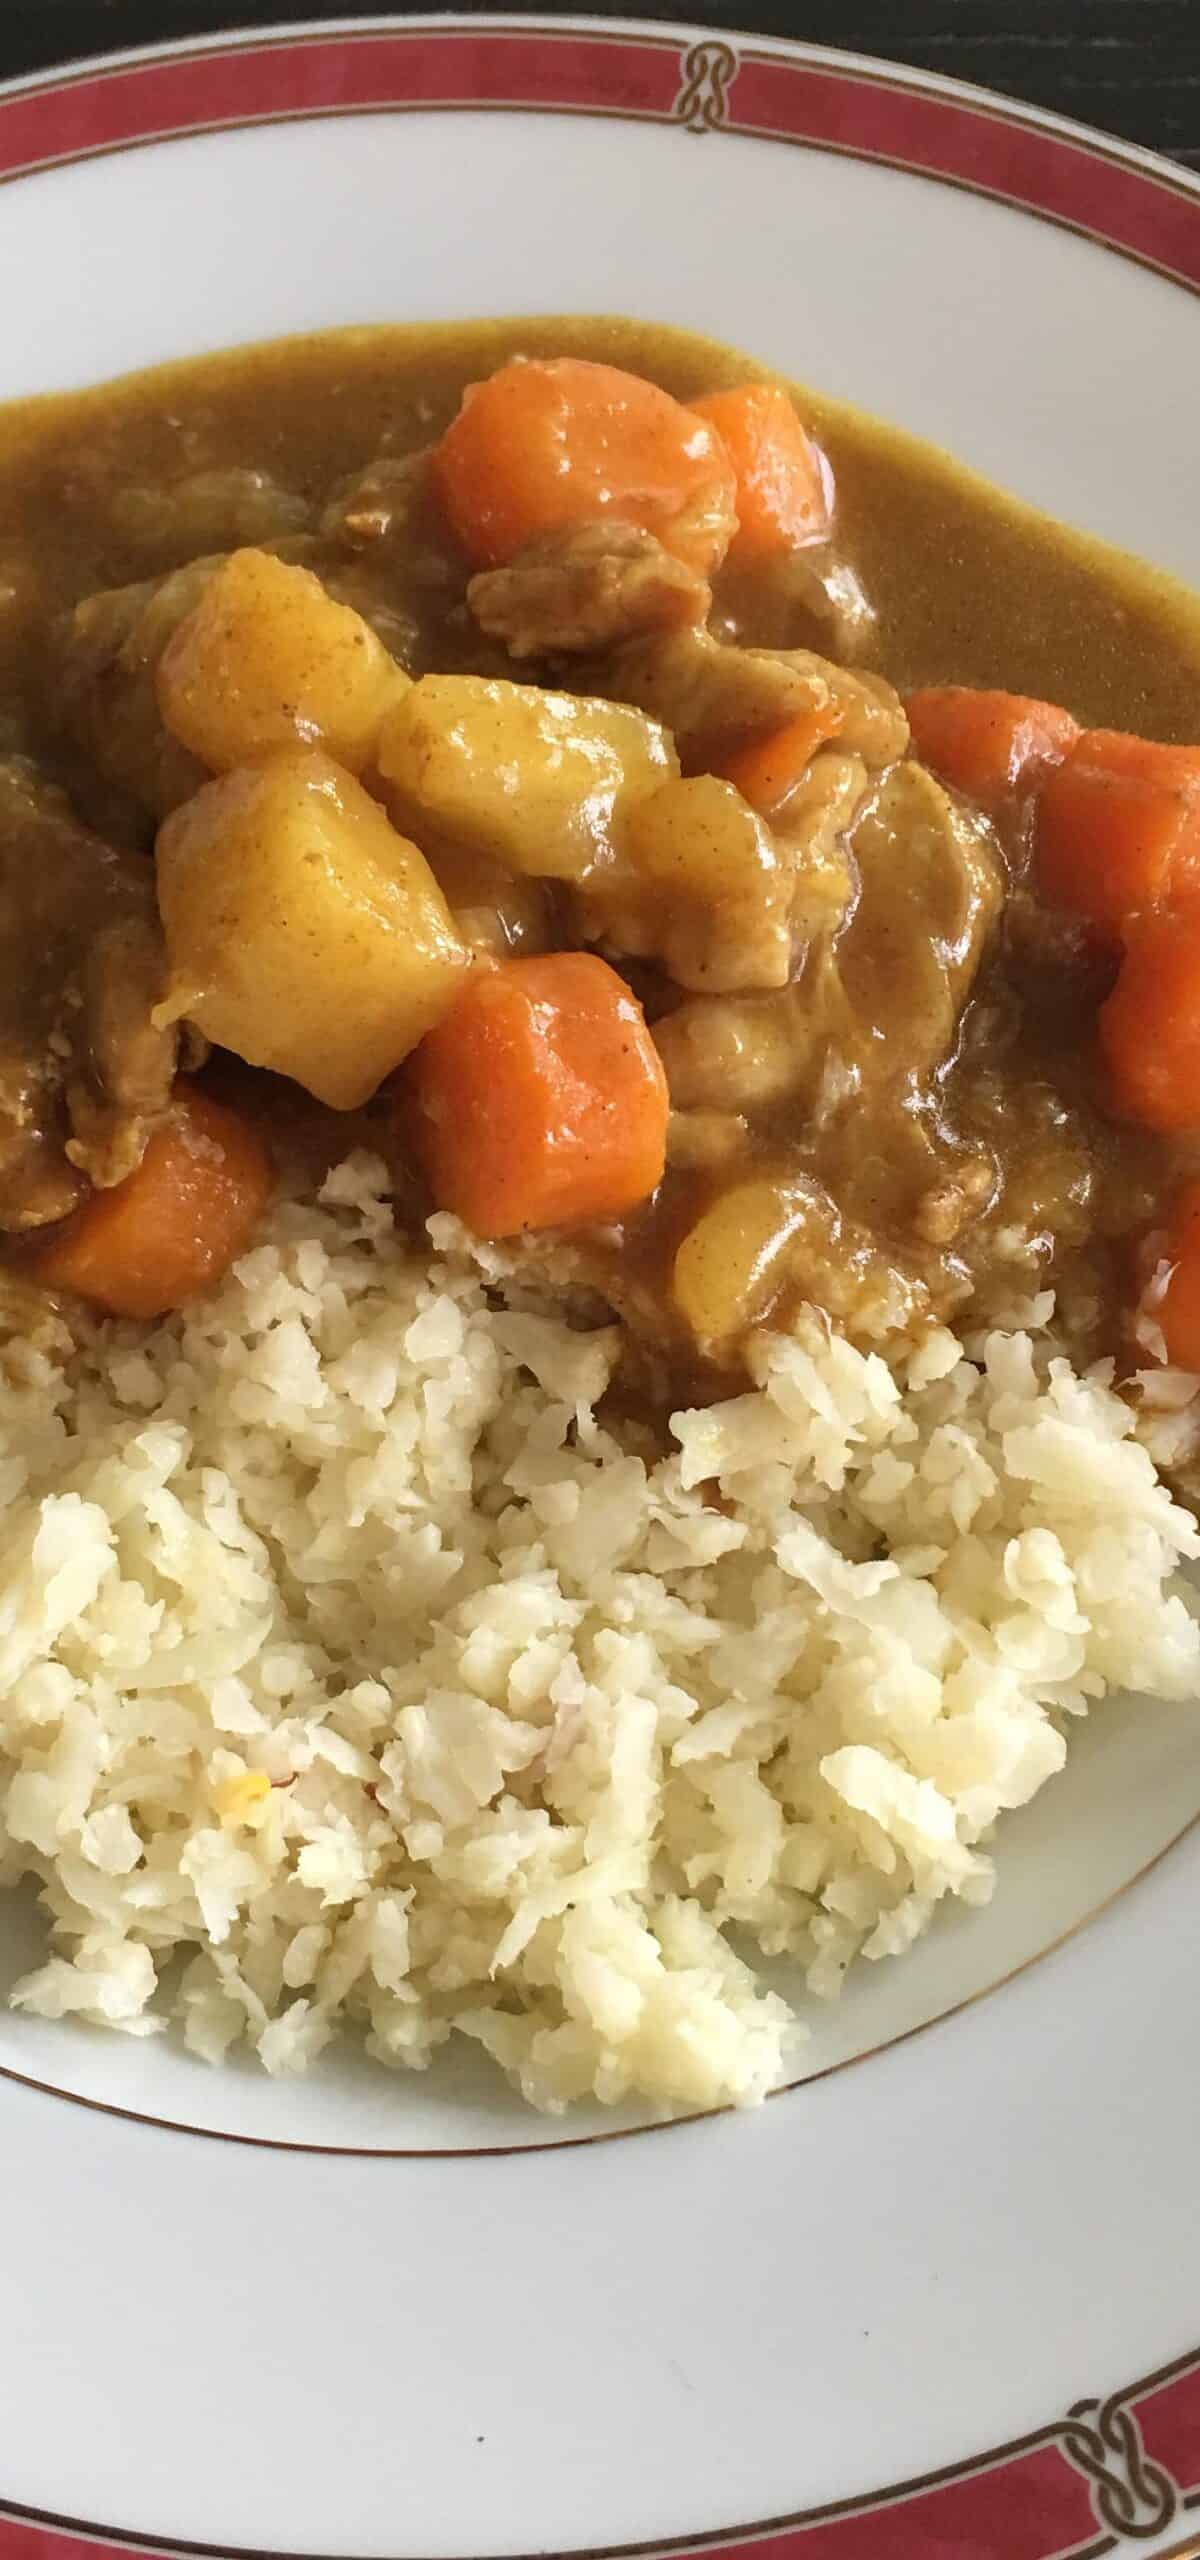  A tantalizing bowl of Low Carb Japanese Curry, perfect for a cozy night in!